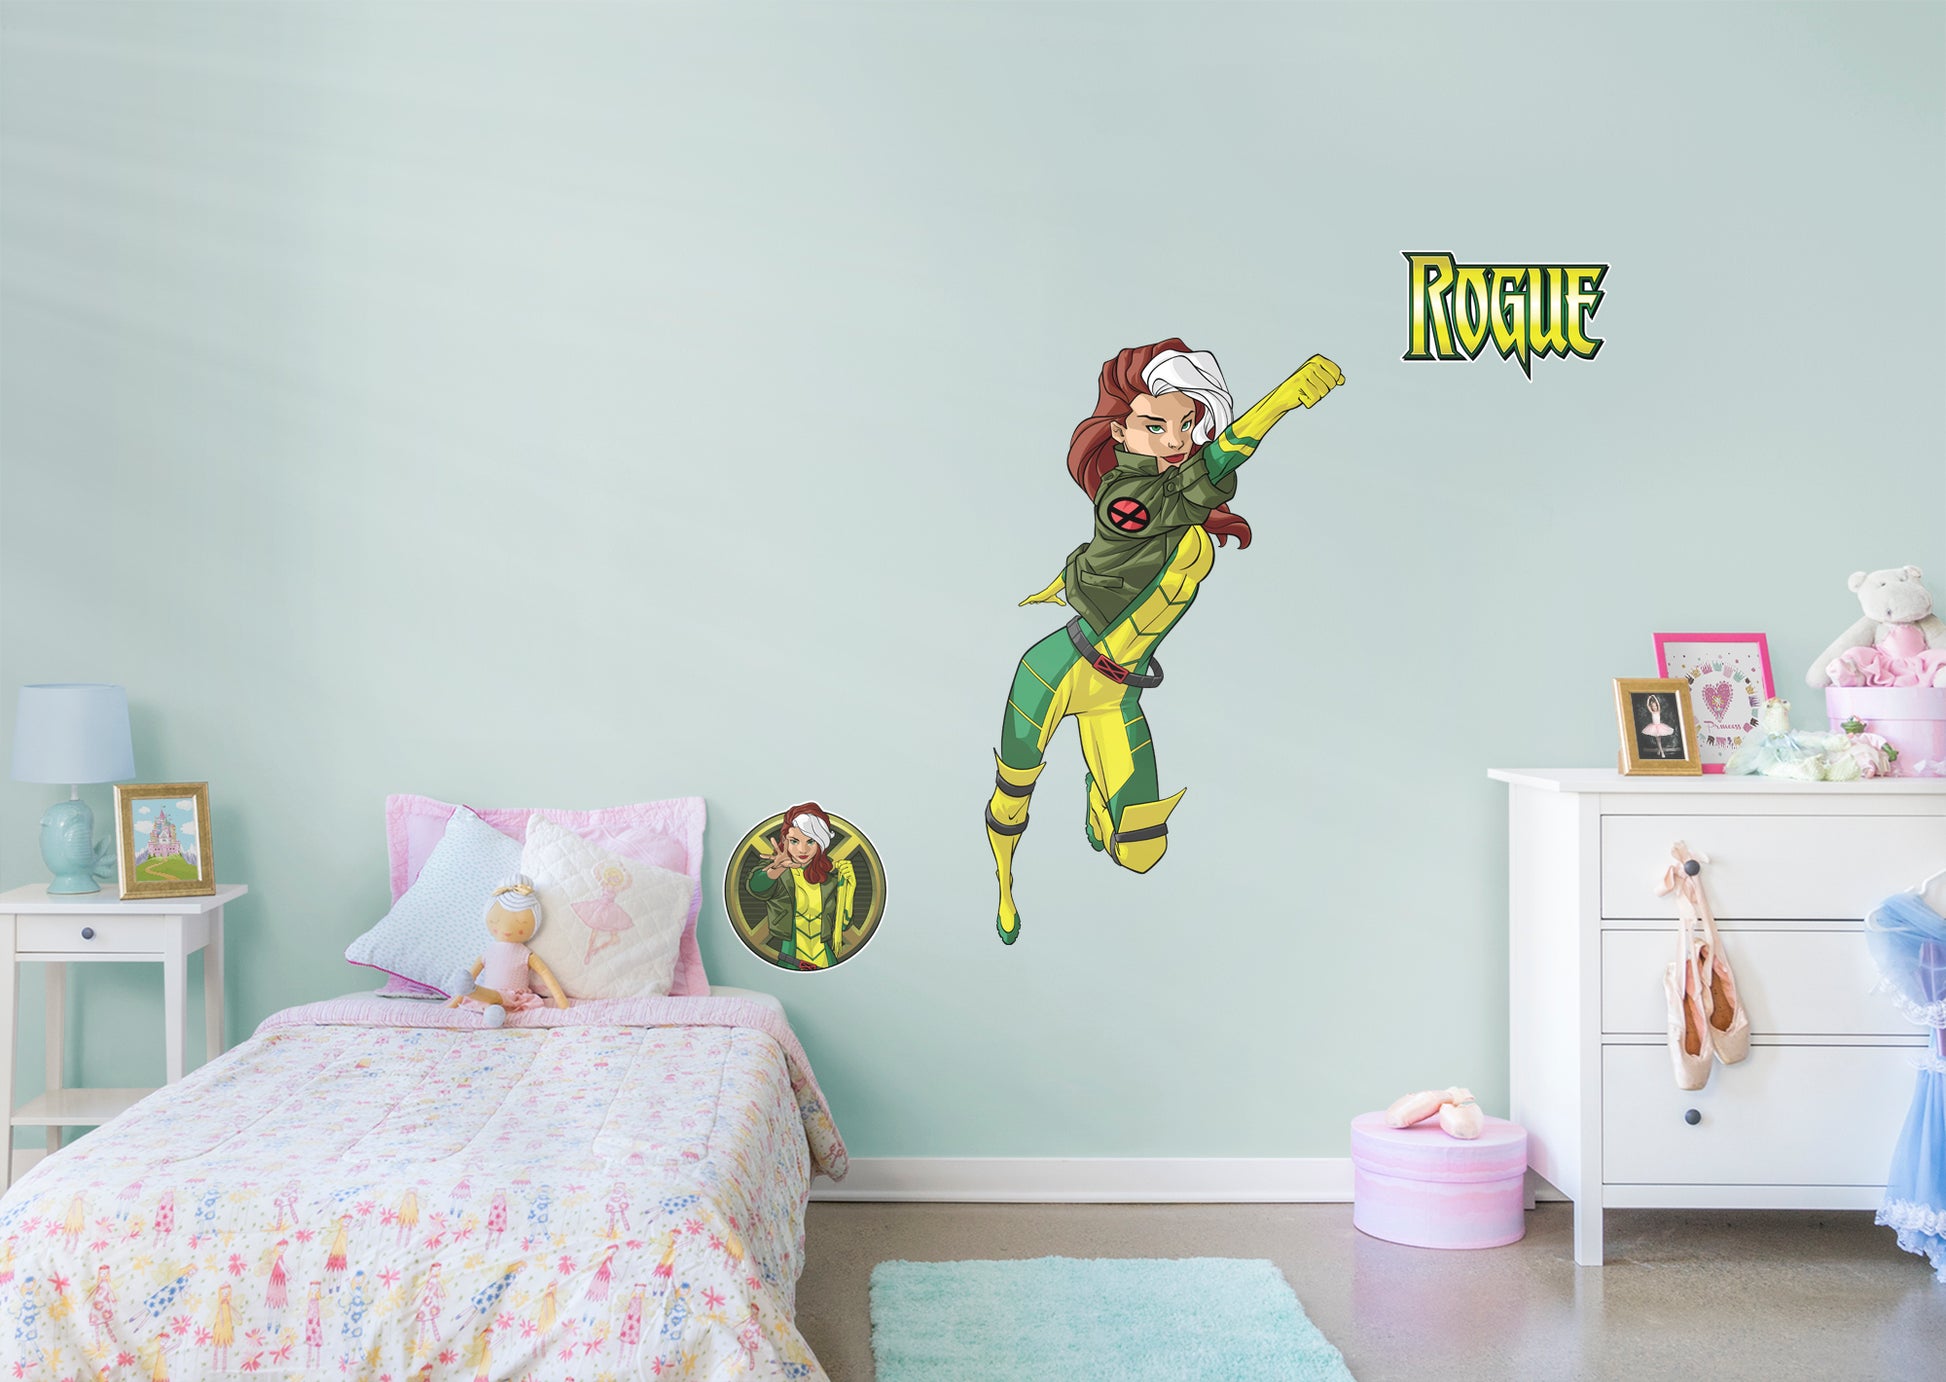 Giant Character + 2 Decals (30"W x 51"H)